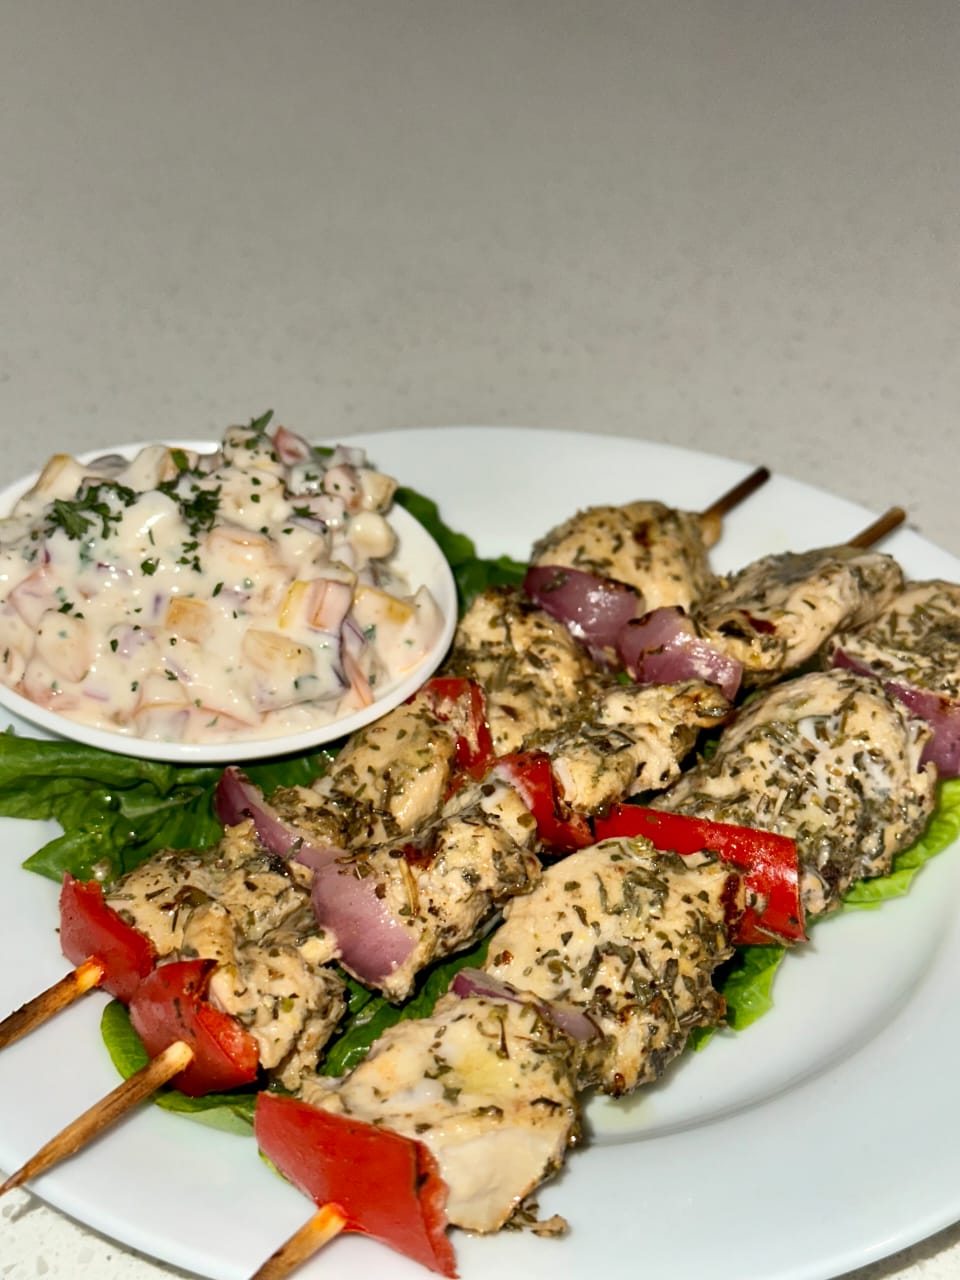 C:\Users\GCPI-ROBBY\Desktop\PRS\STACIA\UPDATED PHOTOS\2. Spiced Chicken Skewers.jpg